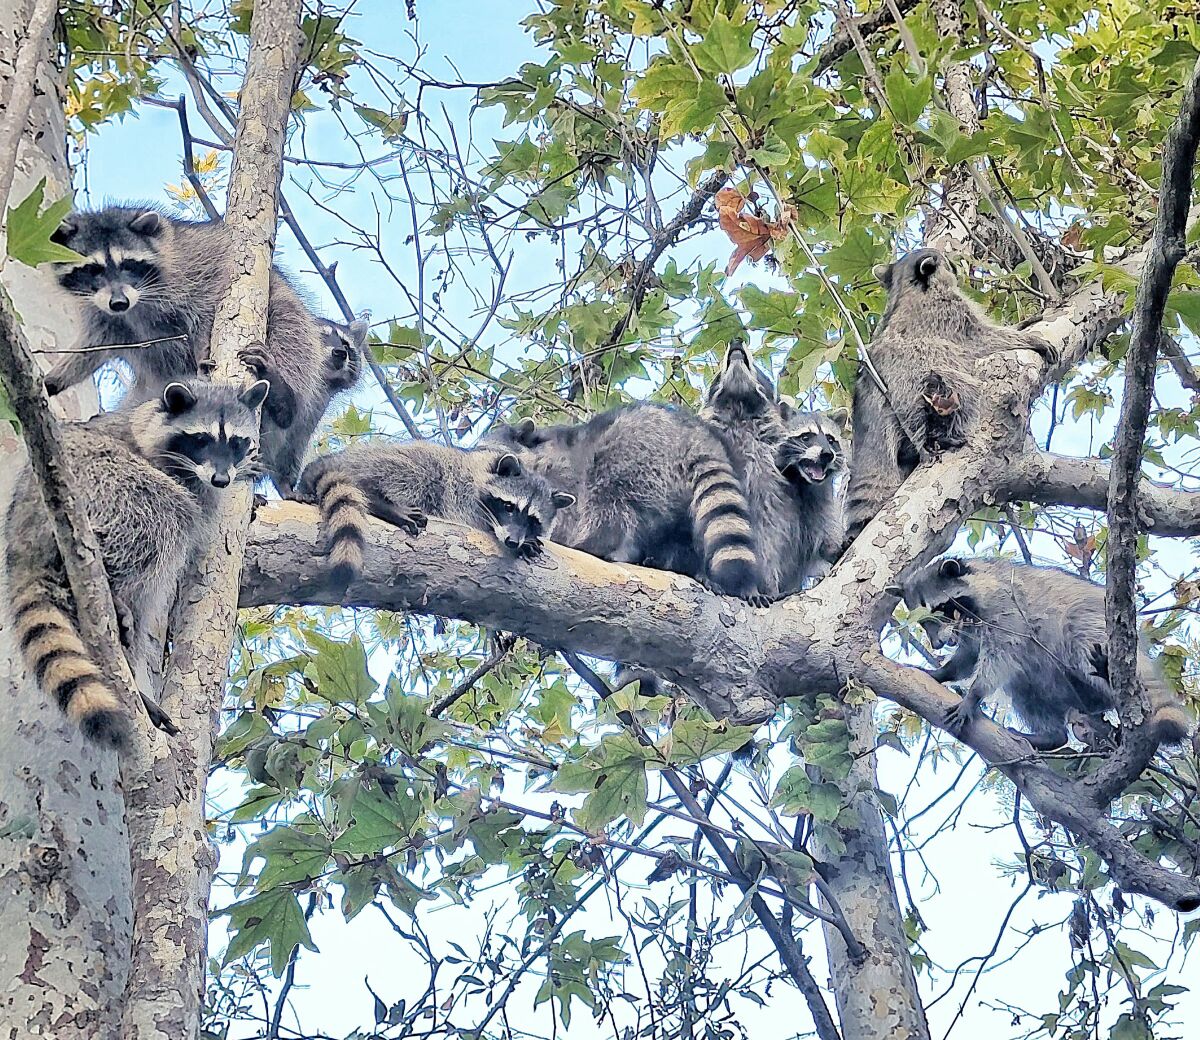 In just a few minutes after their release, some raccoon babies found a safe spot in a nearby tree.